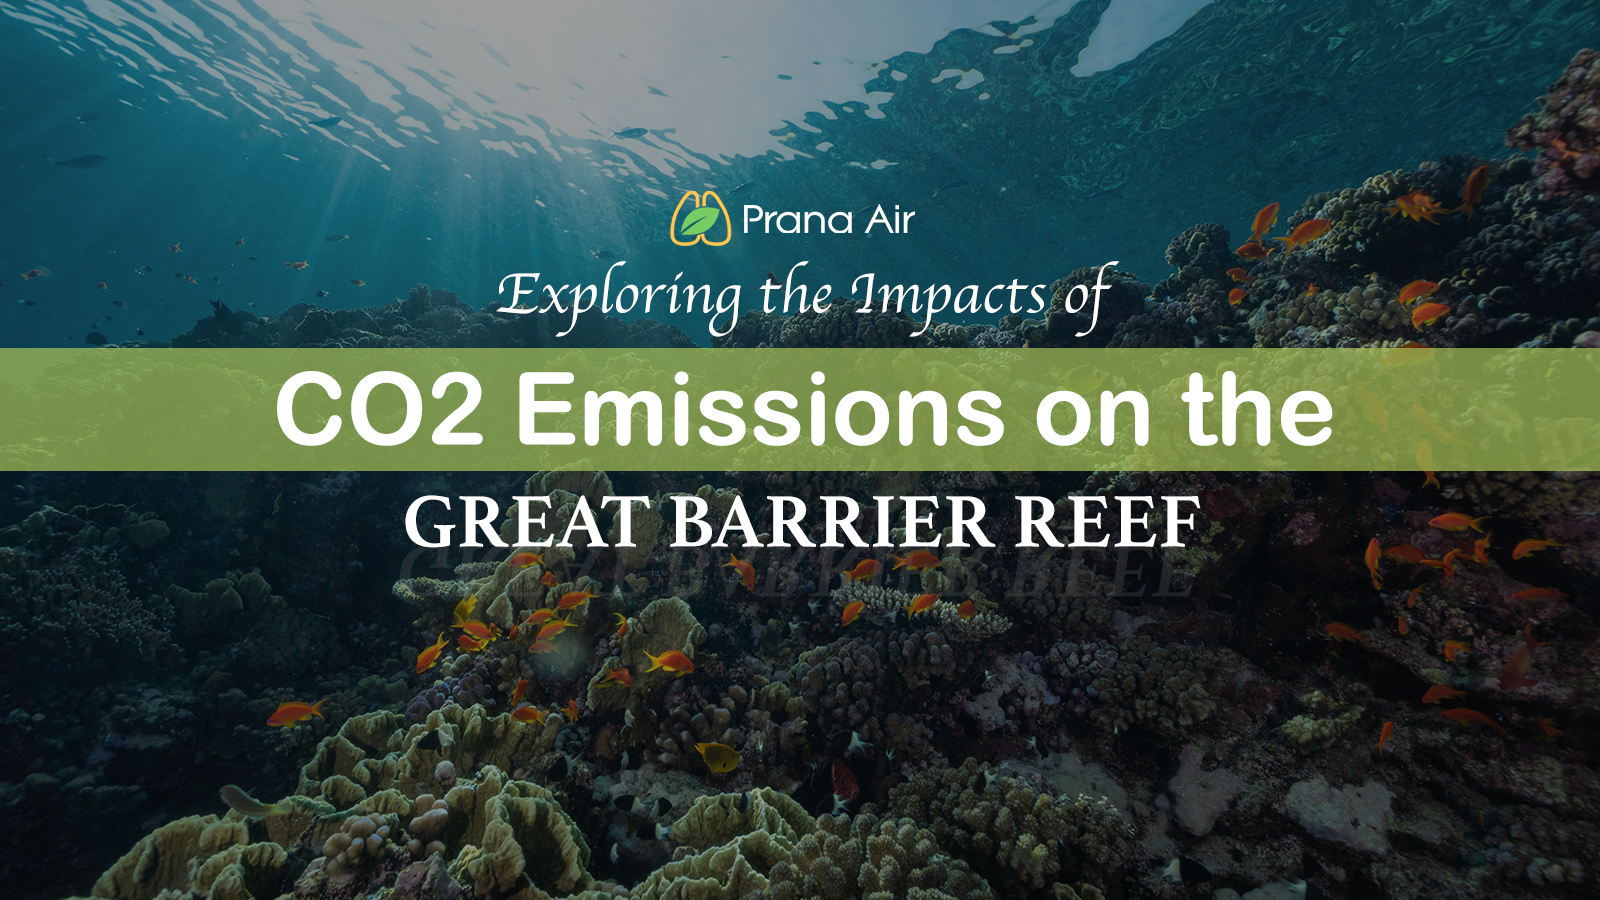 What is Coral Bleaching and how does it impact the Great Barrier Reef?